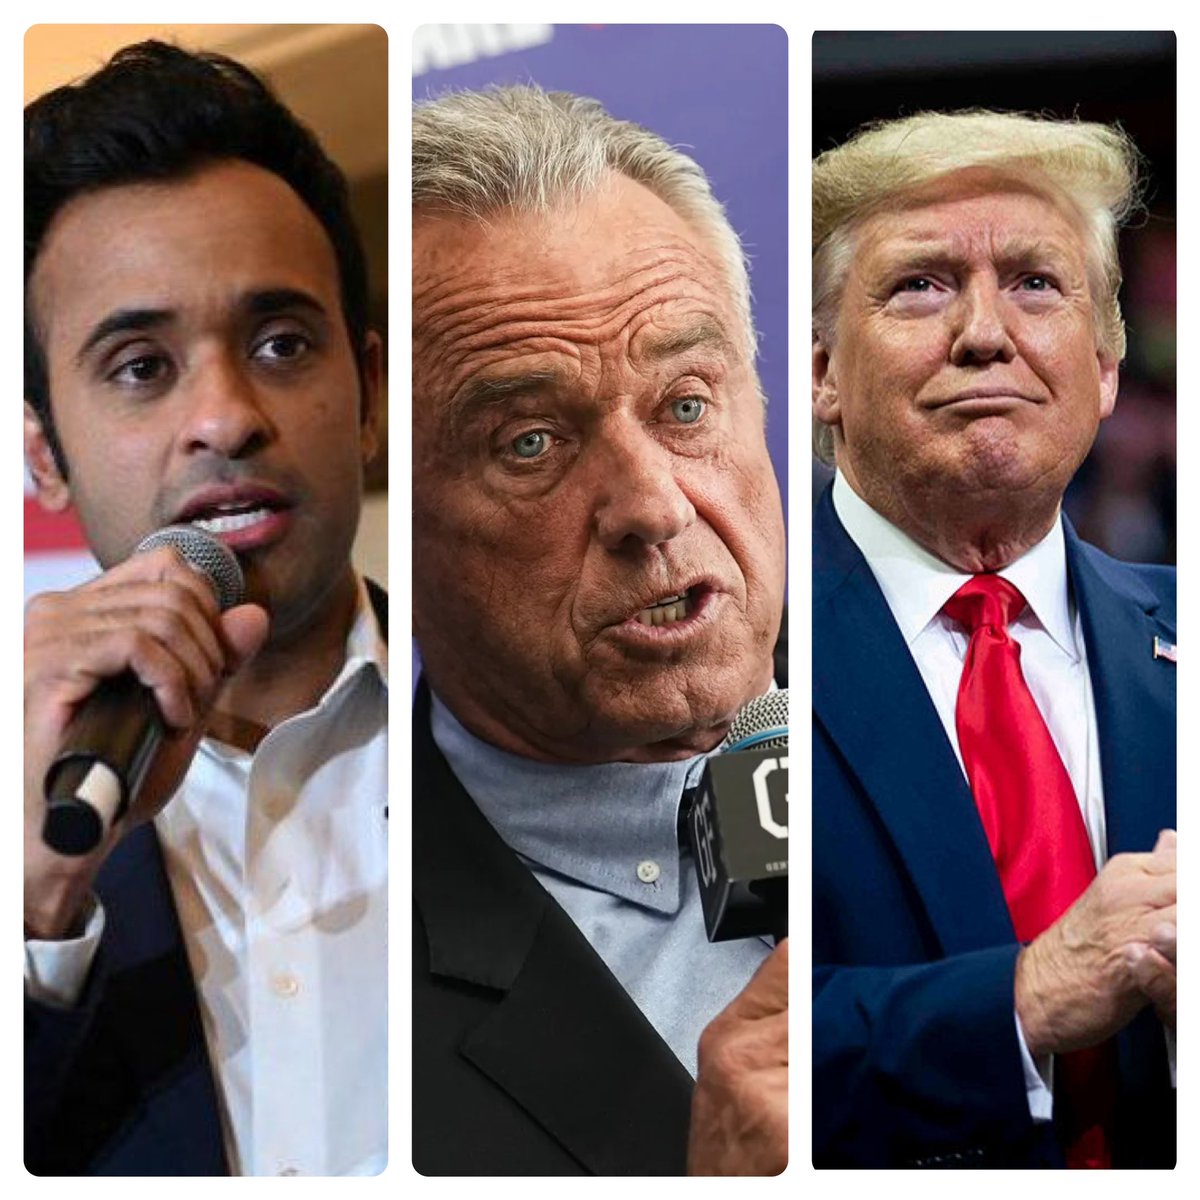 Vivek Ramaswamy, RFK Jr, and Donald Trump are scheduled to appear at the Libertarian Party National Convention at the end of the month. What are your thoughts?